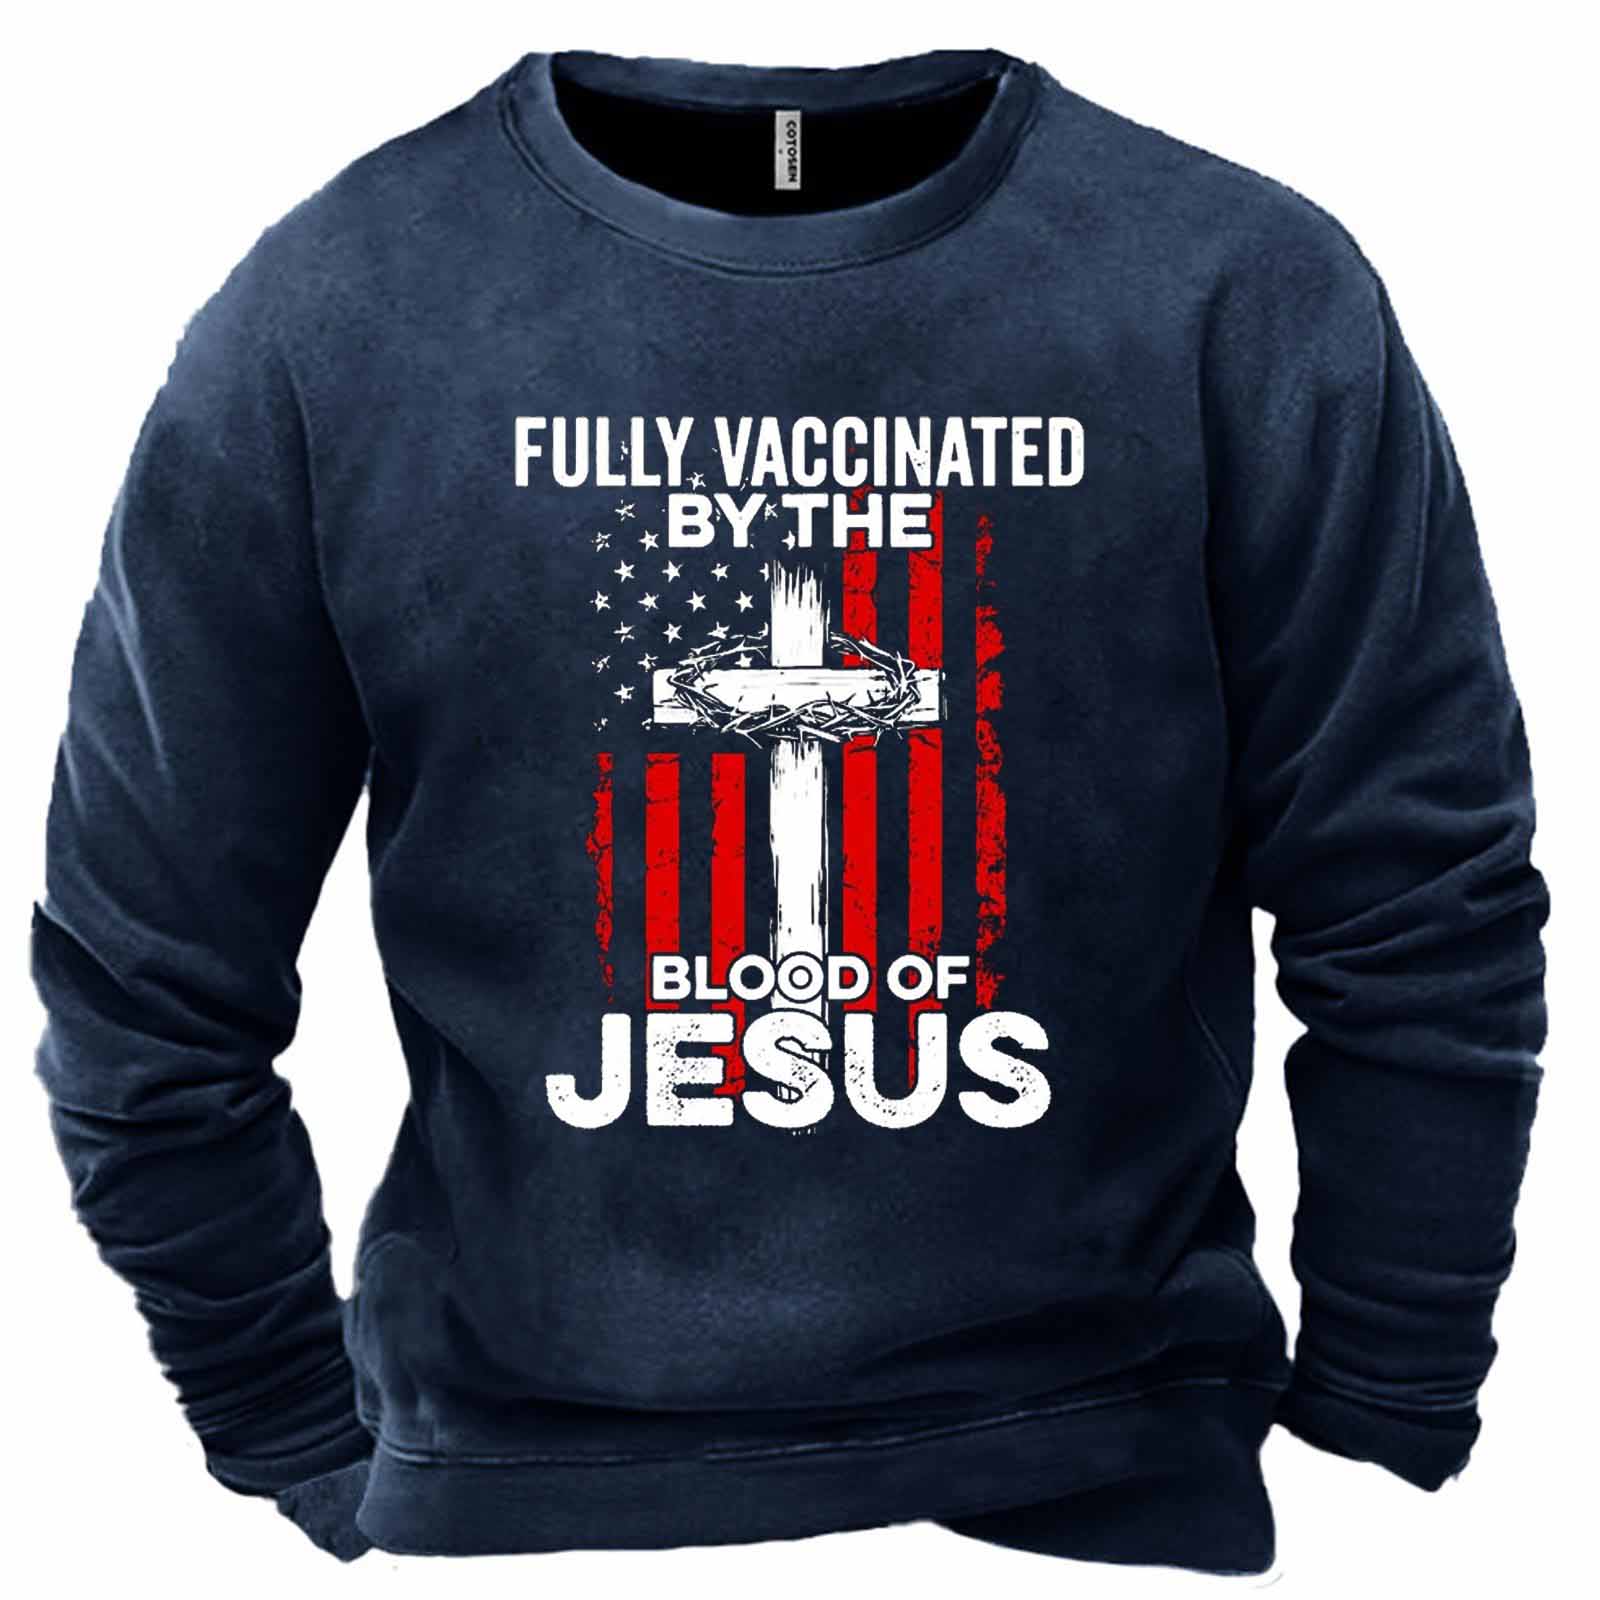 Men's Fully Vaccinated By Chic The Blood Of Jesus Print Sweatshirt